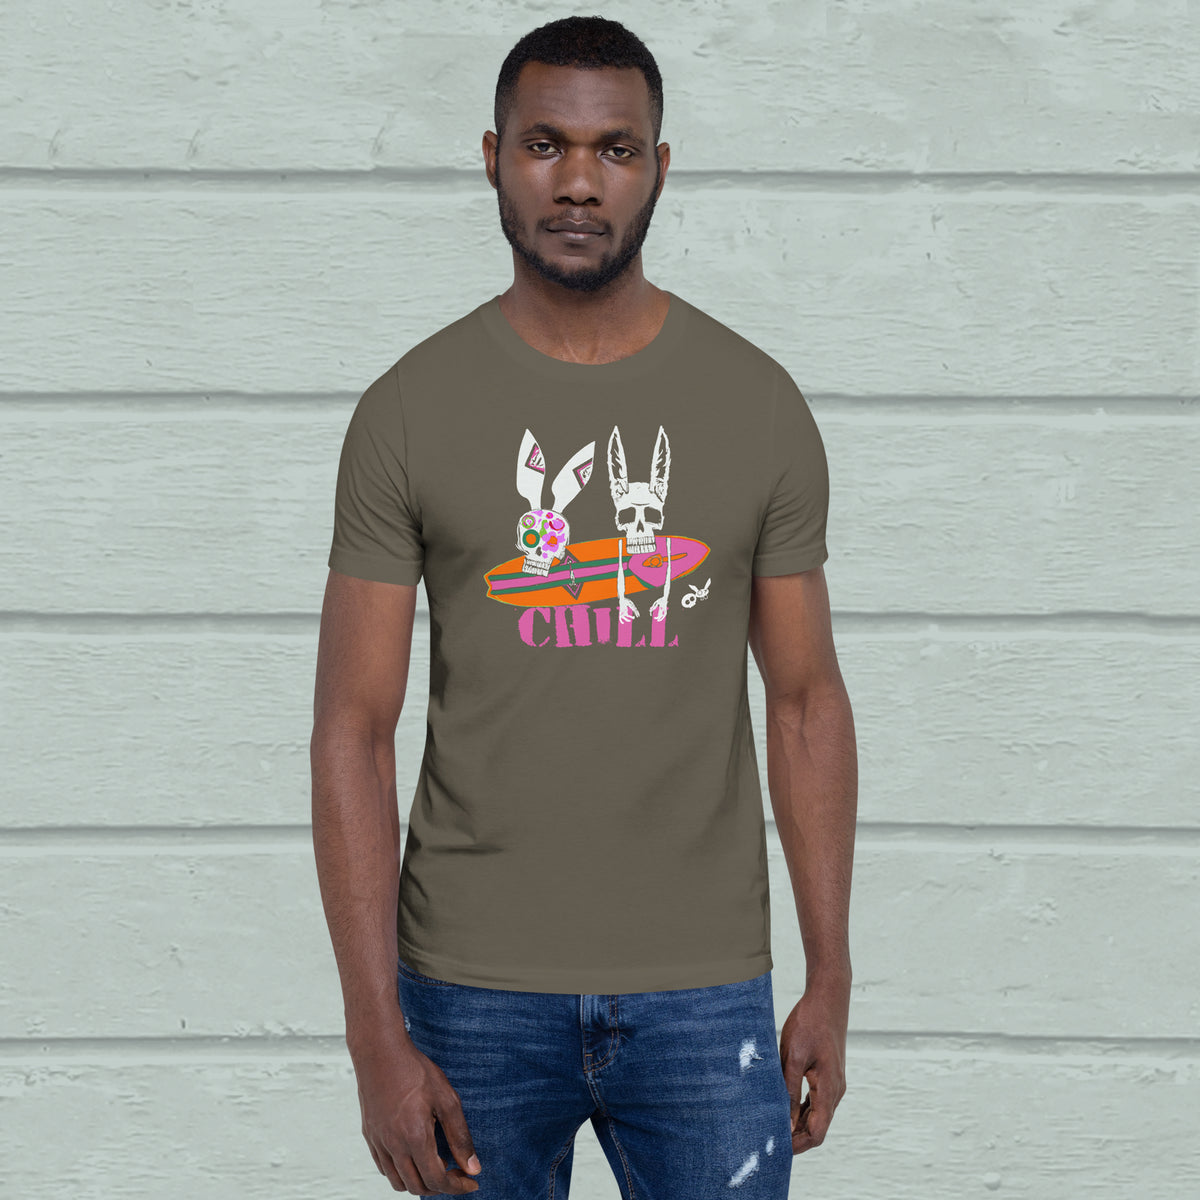 Chill TEE, army